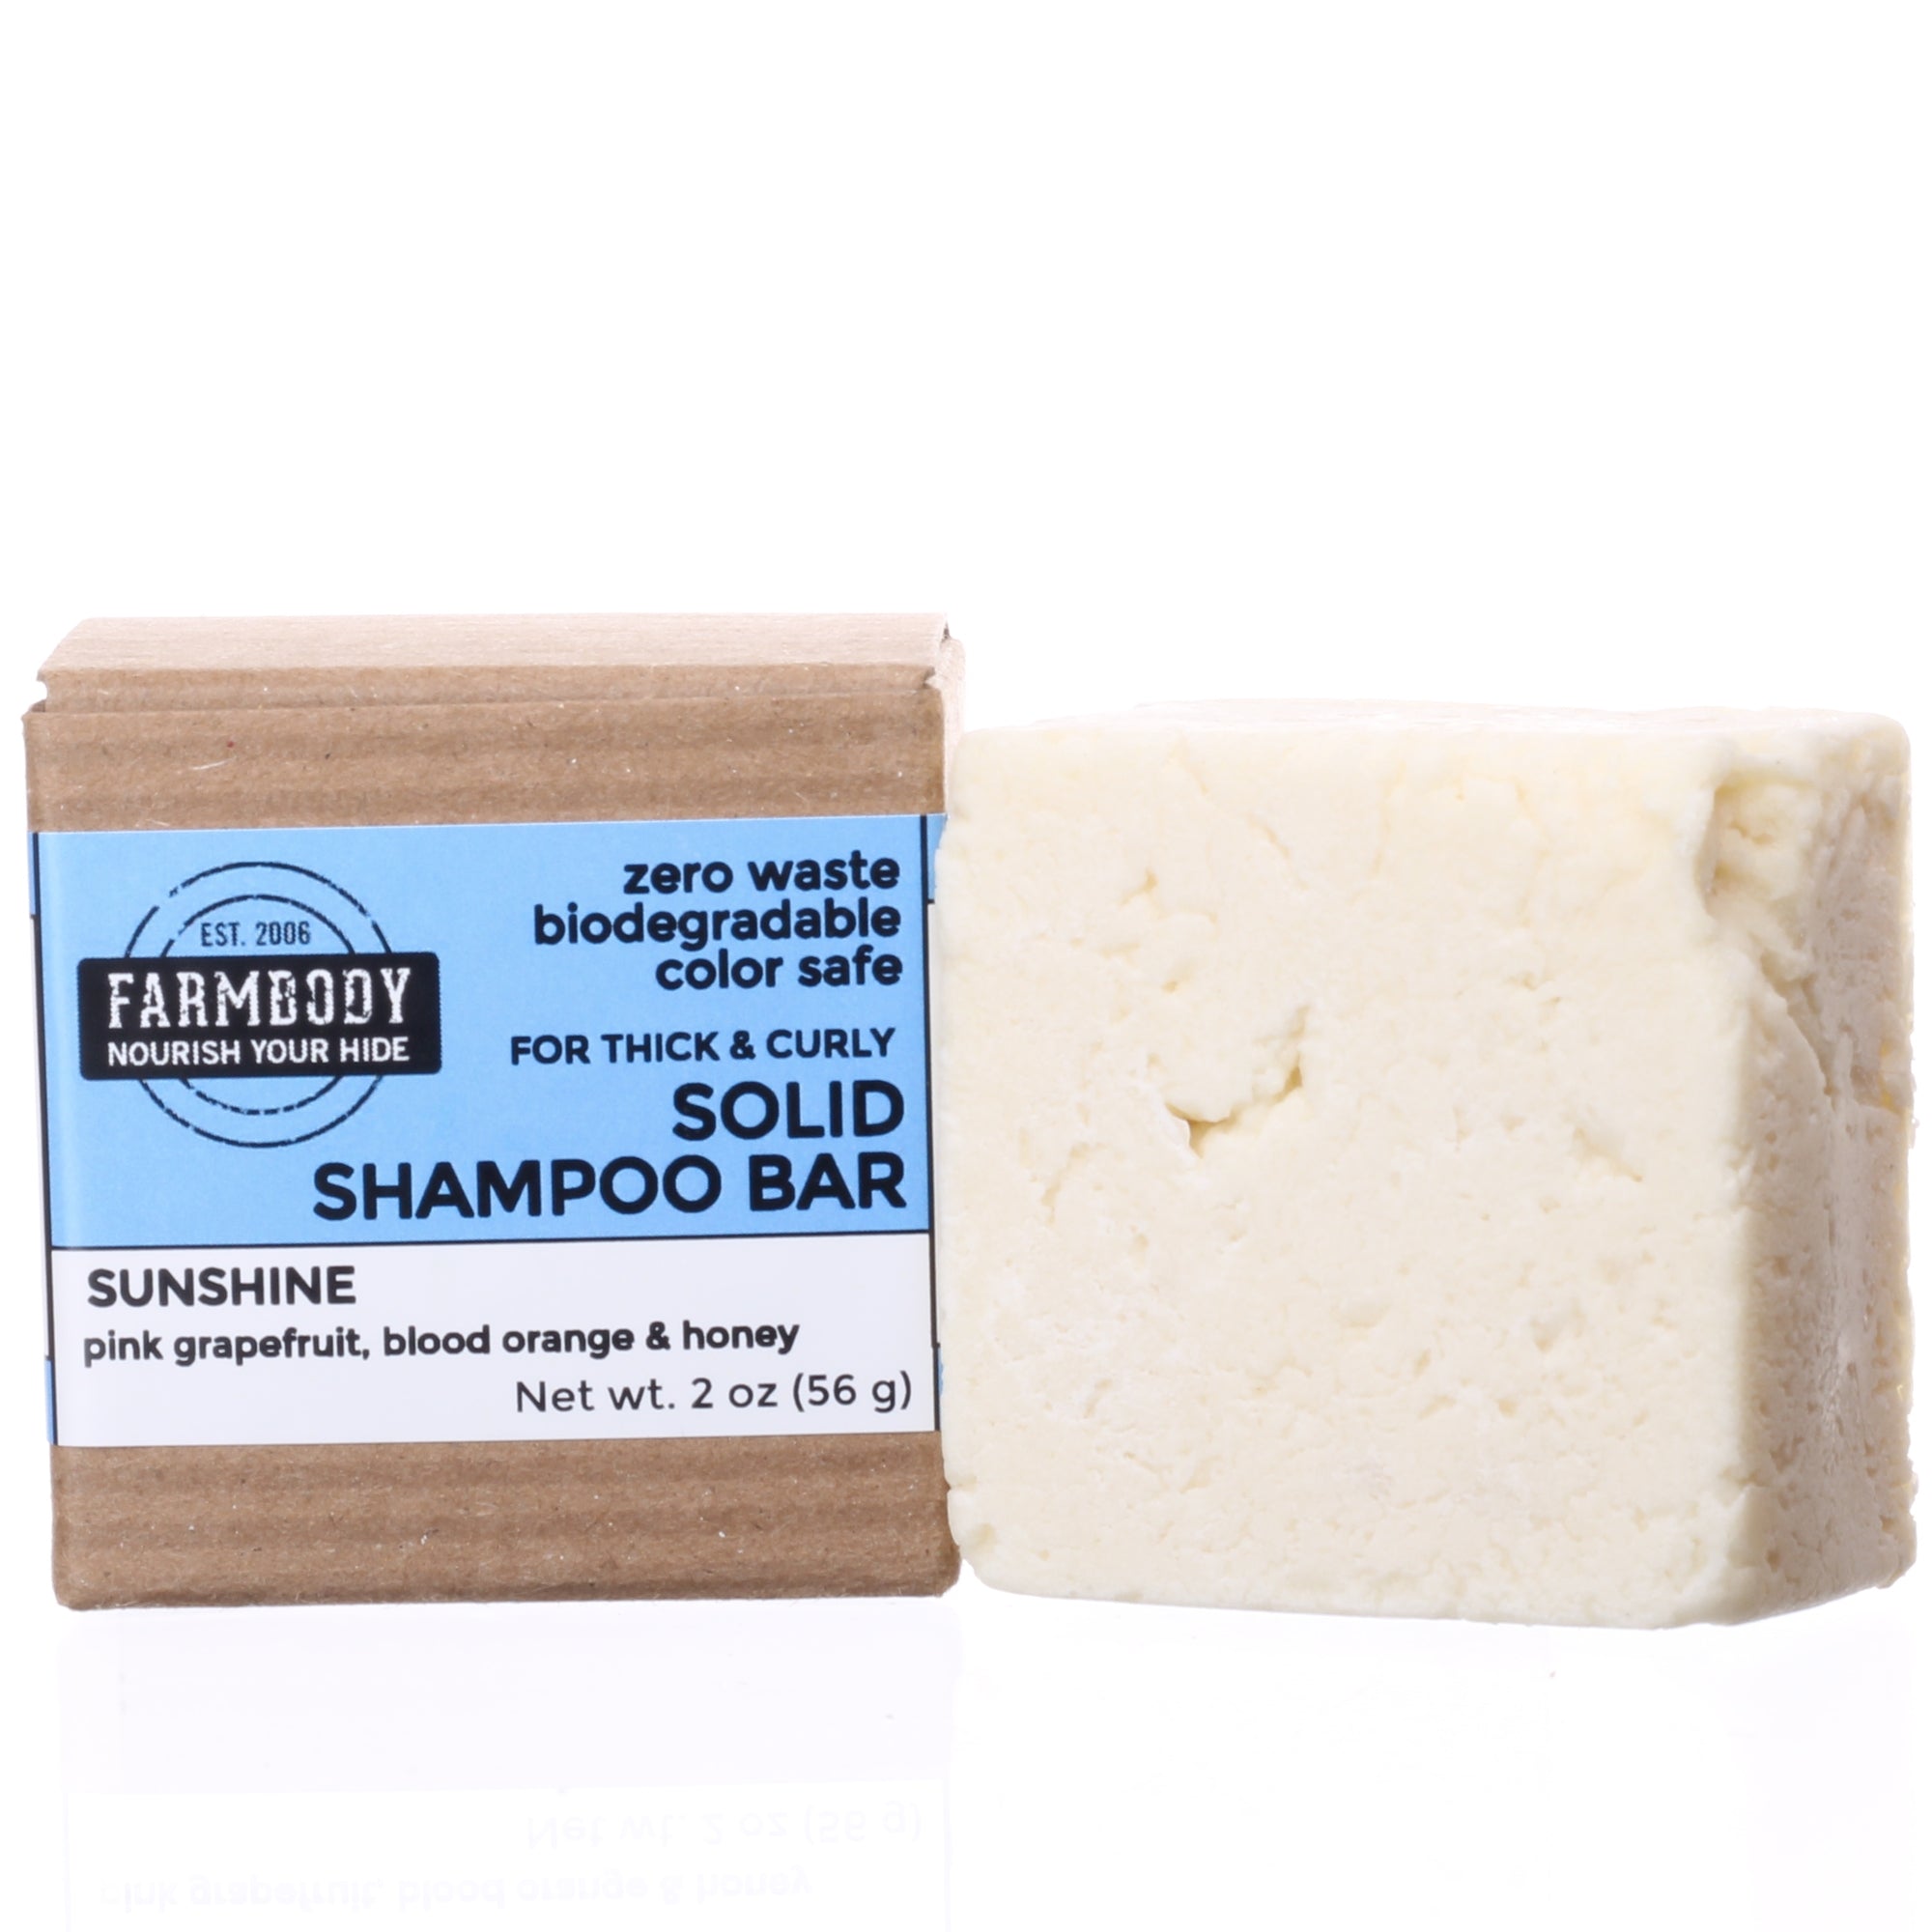 Farmbody Solid Shampoo Bar for thick and curly and ethnic hair in sunshine which is pink grapefruit blood orange and honey. Safe for color treated hair and free of cocamidopropyl betaine